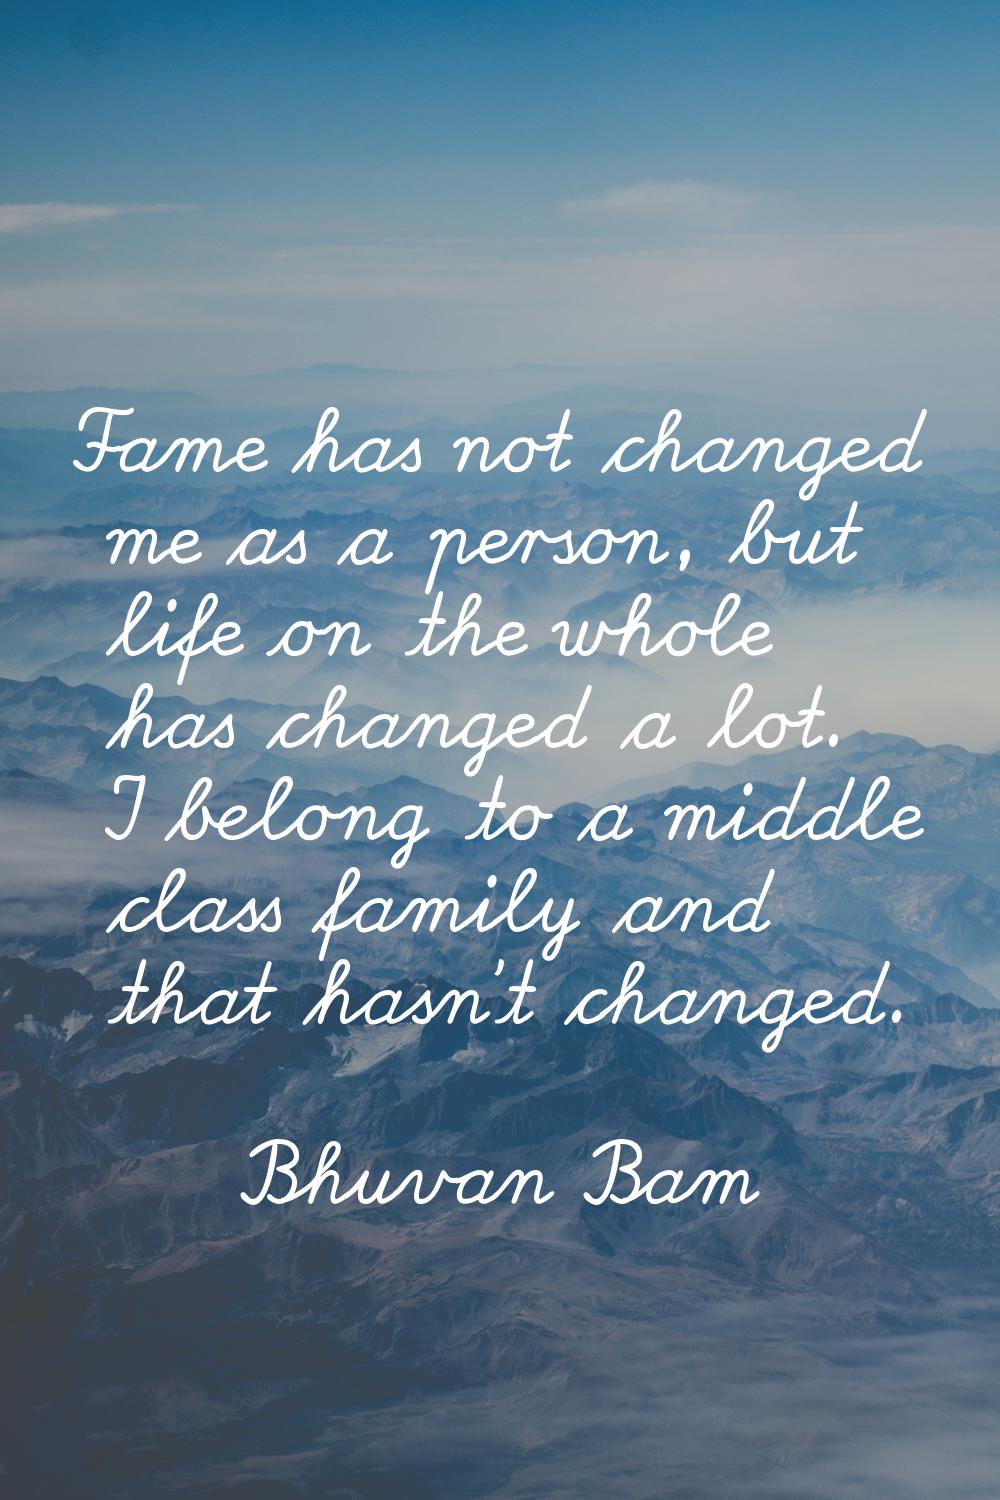 Fame has not changed me as a person, but life on the whole has changed a lot. I belong to a middle 